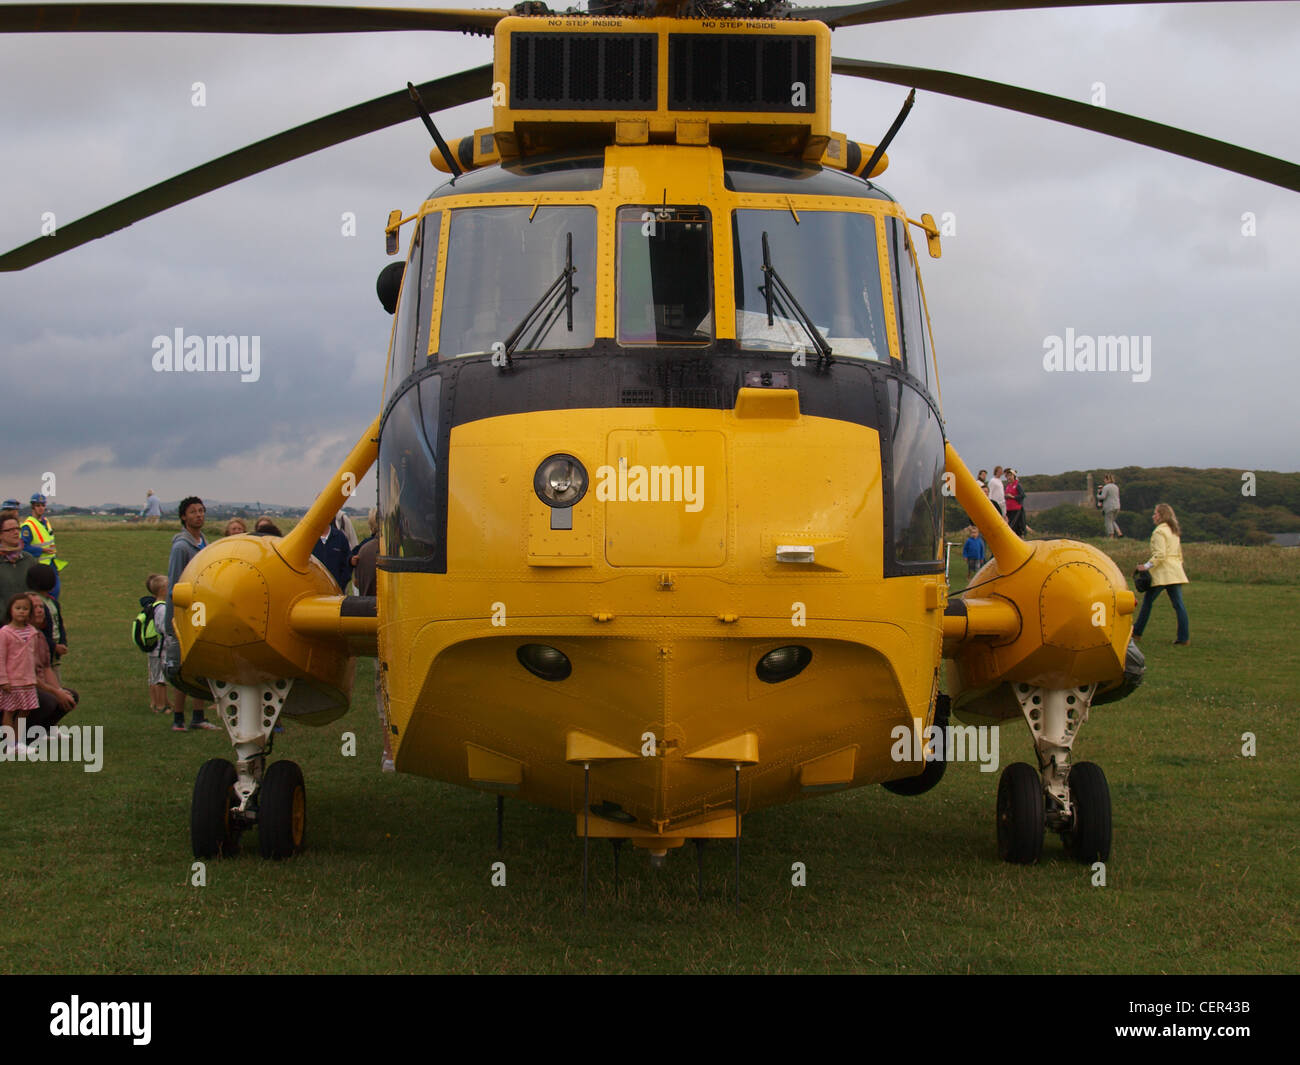 RAF rescue helicopter, Cornwall, UK Stock Photo